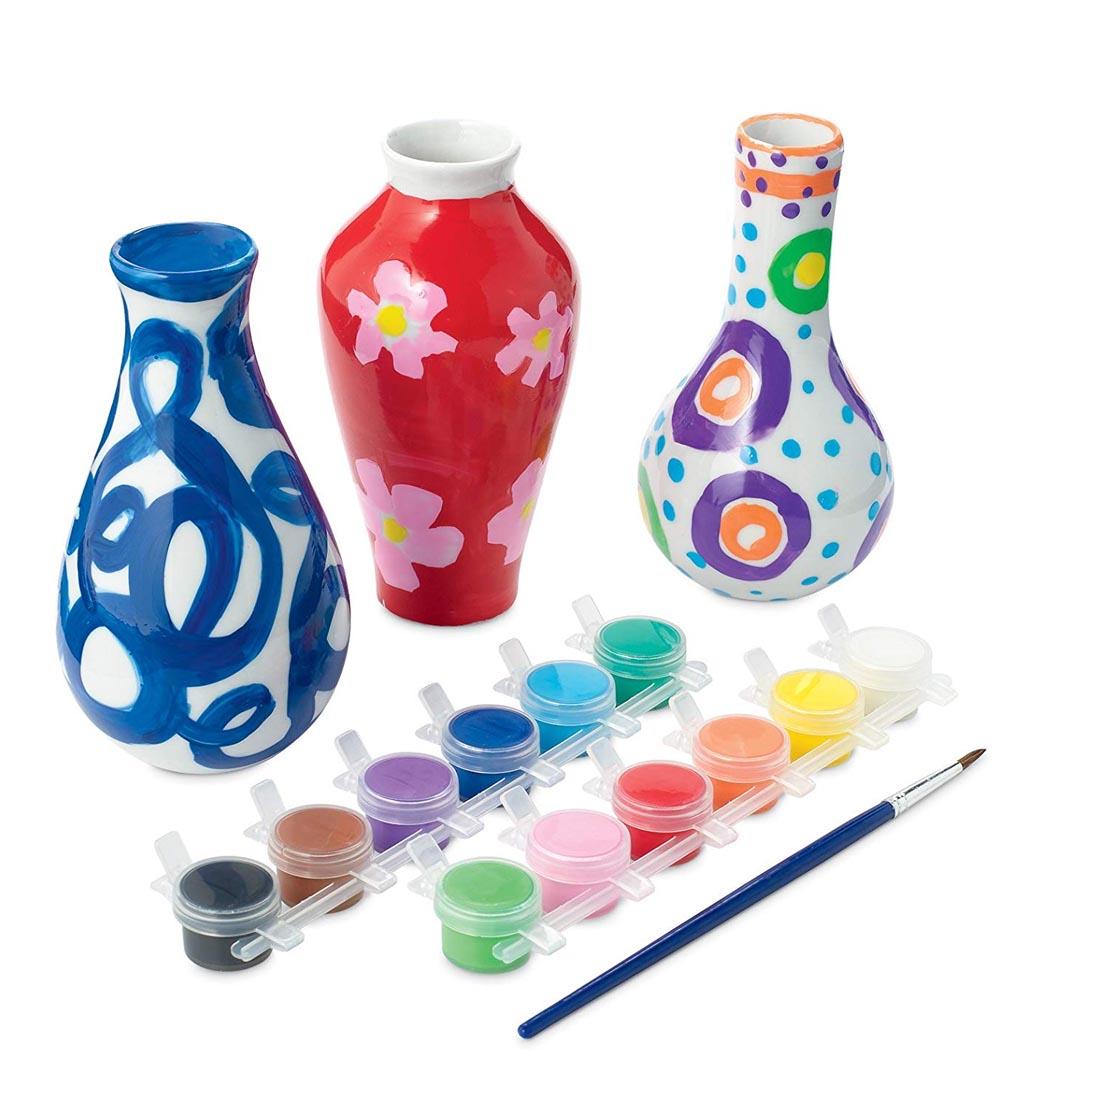 Completed projects from the Paint Your Own Porcelain Vases Kit